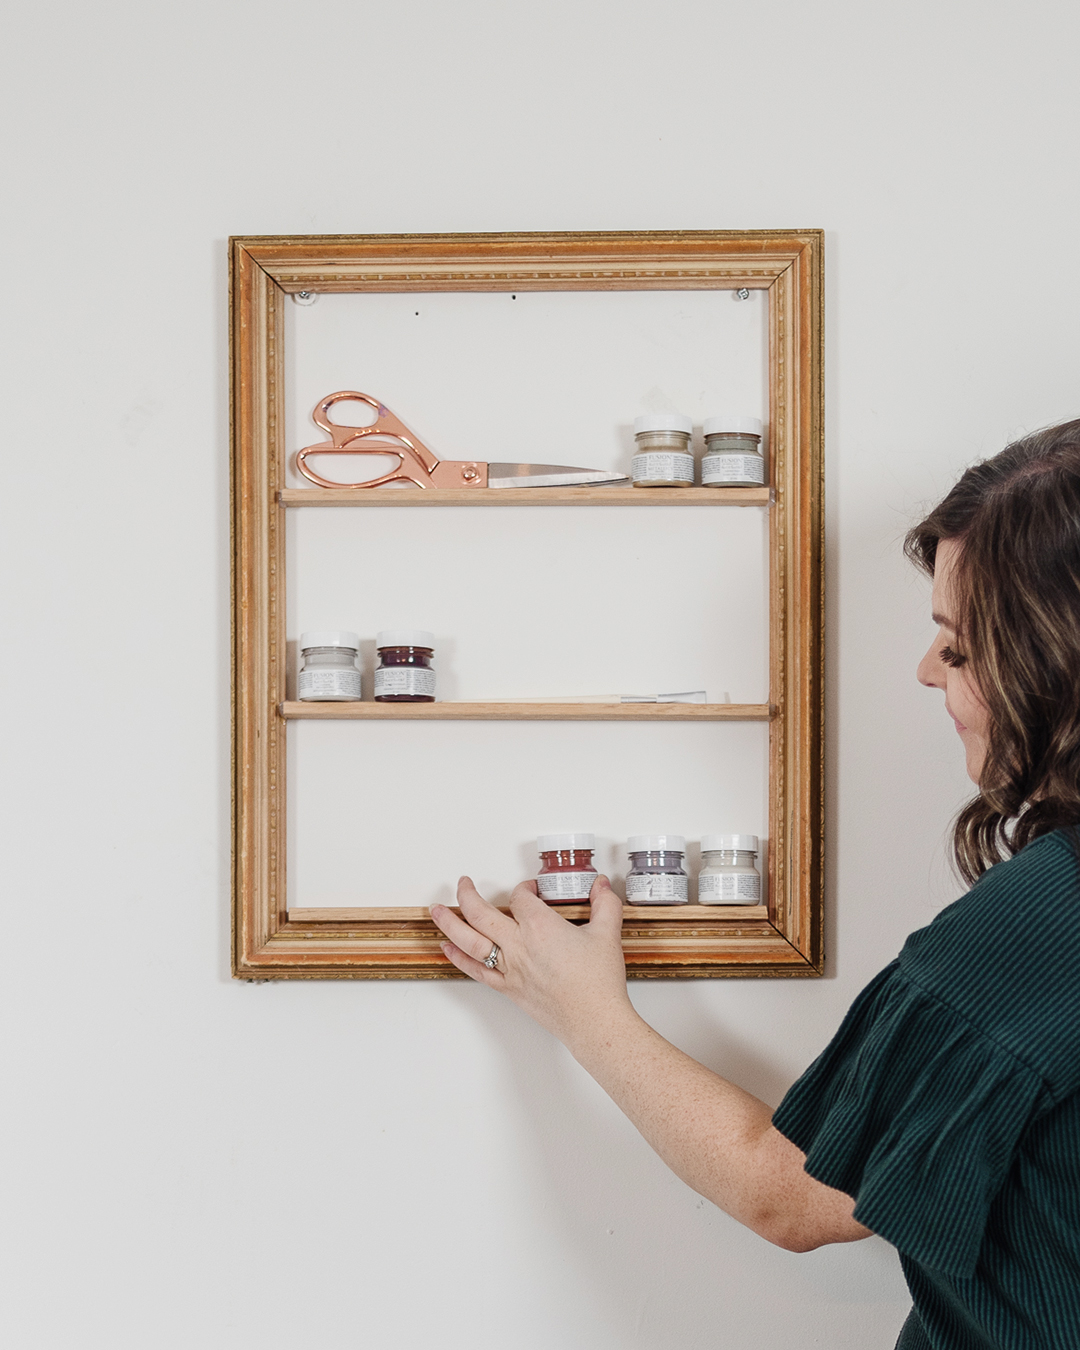 How to Turn an Old Picture Frame into a Shelf